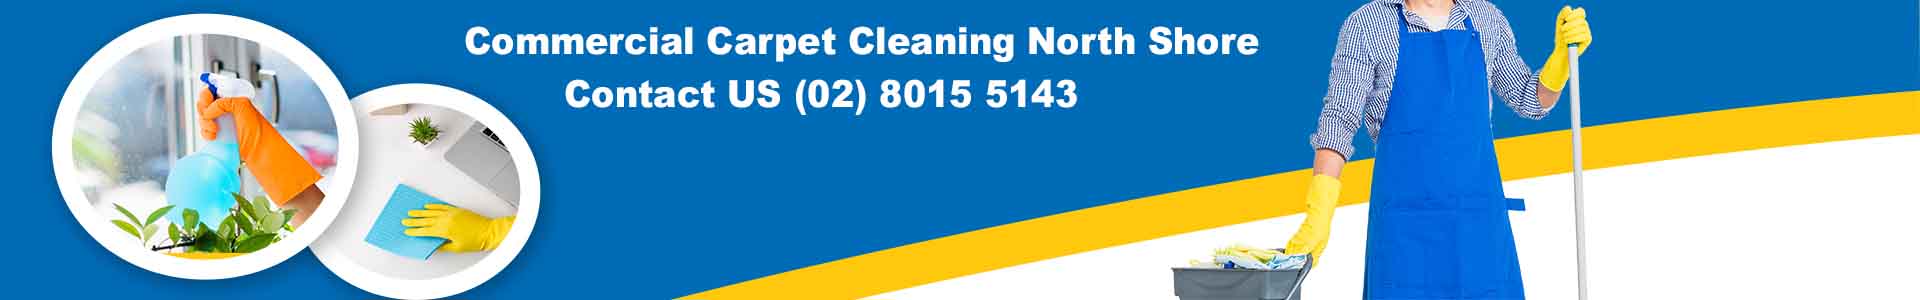 About Us Carpet Tile Cleaning North Shore